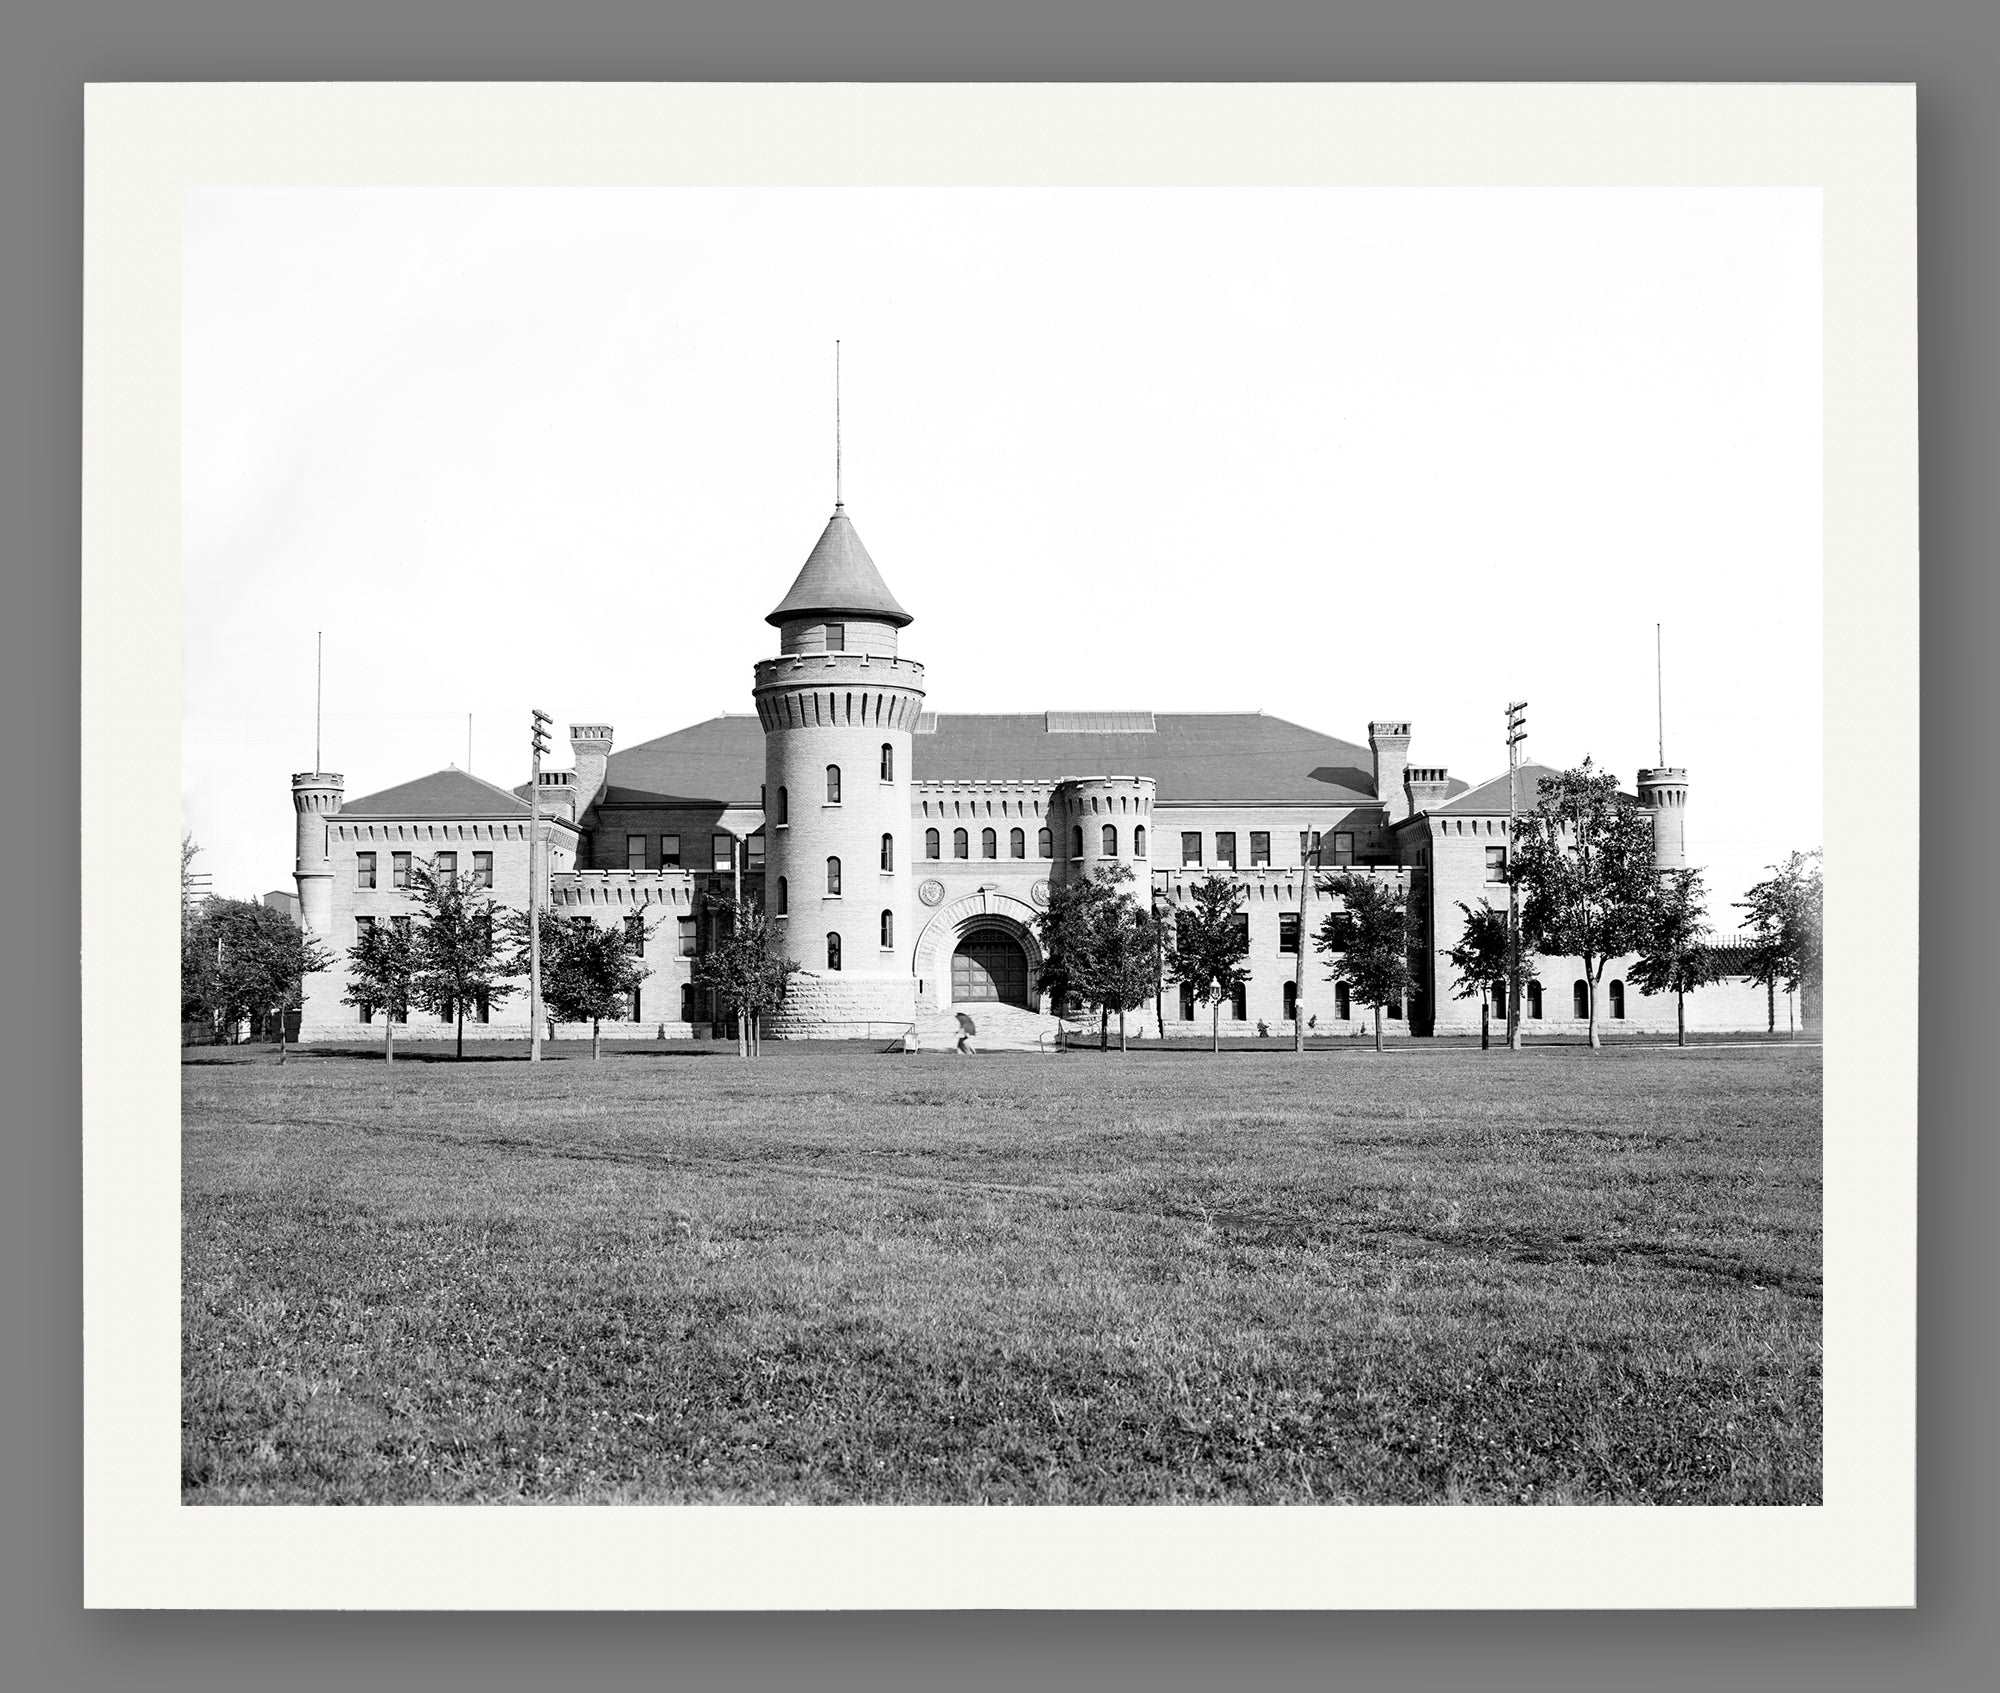 A paper print reproduction of a vintage photograph of the University of Minnesota's Armory